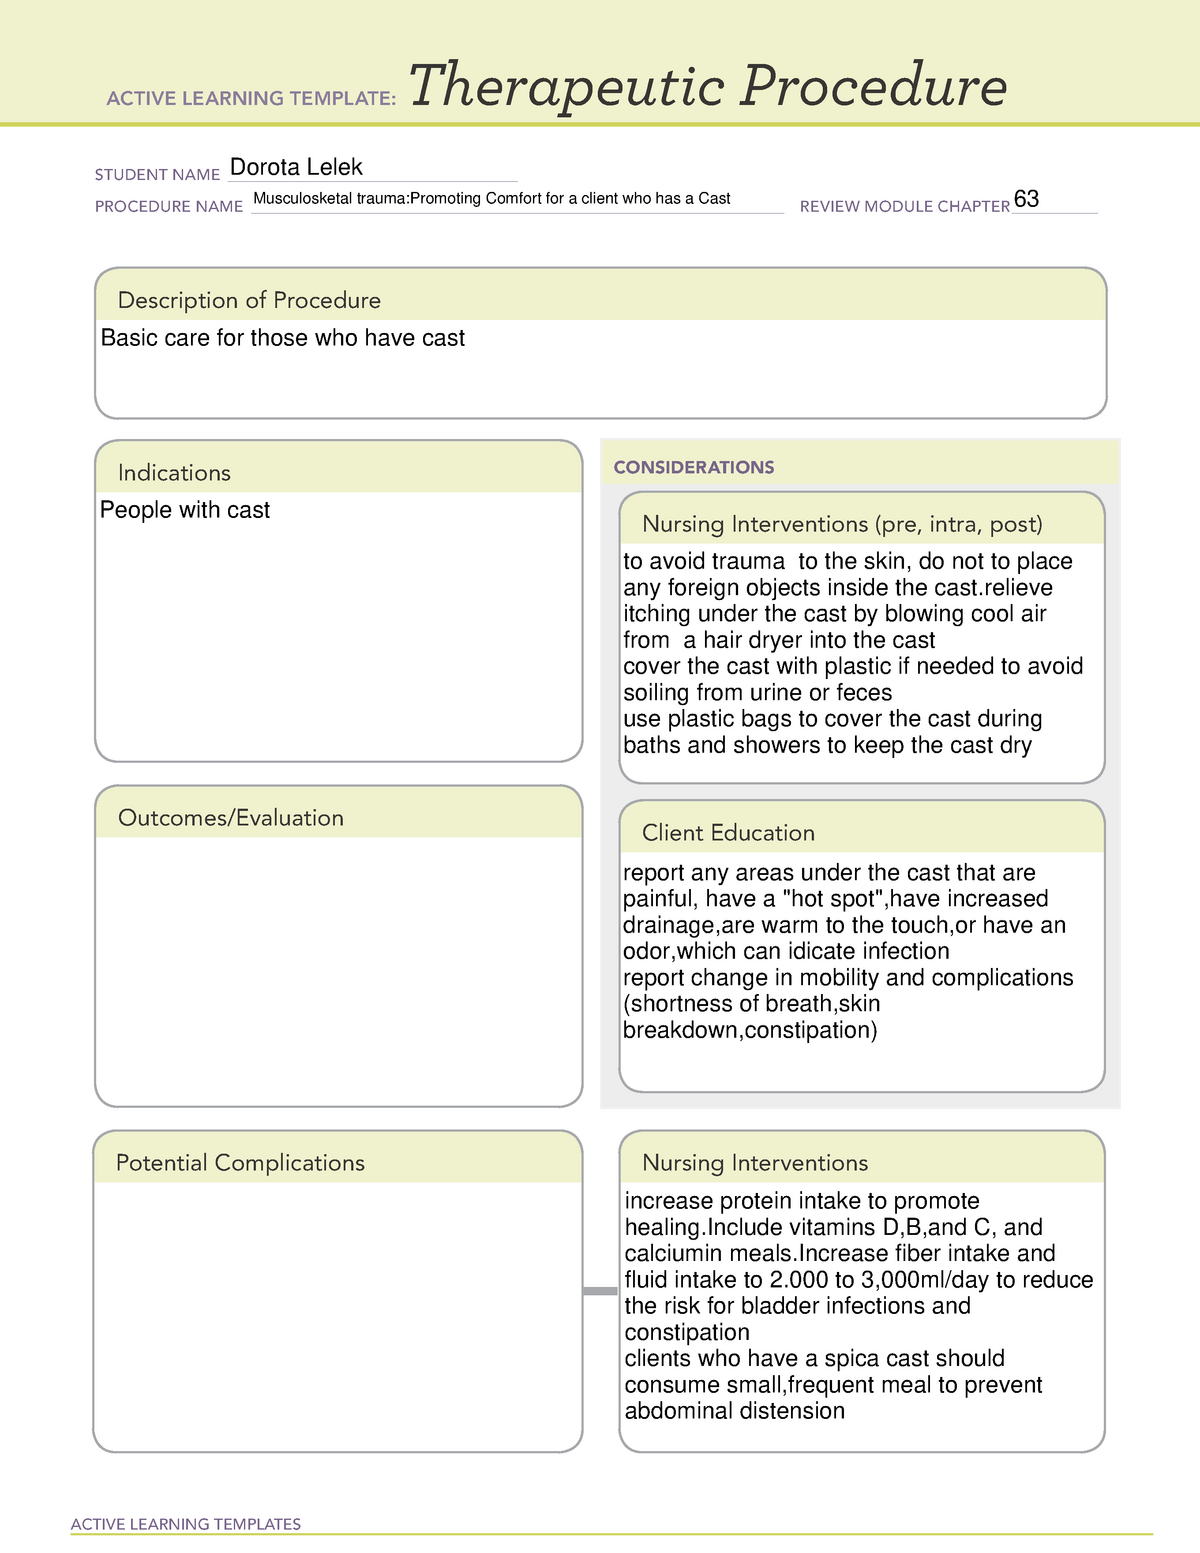 therapeutic-template-atimedspn-3-active-learning-templates-therapeutic-procedure-student-name